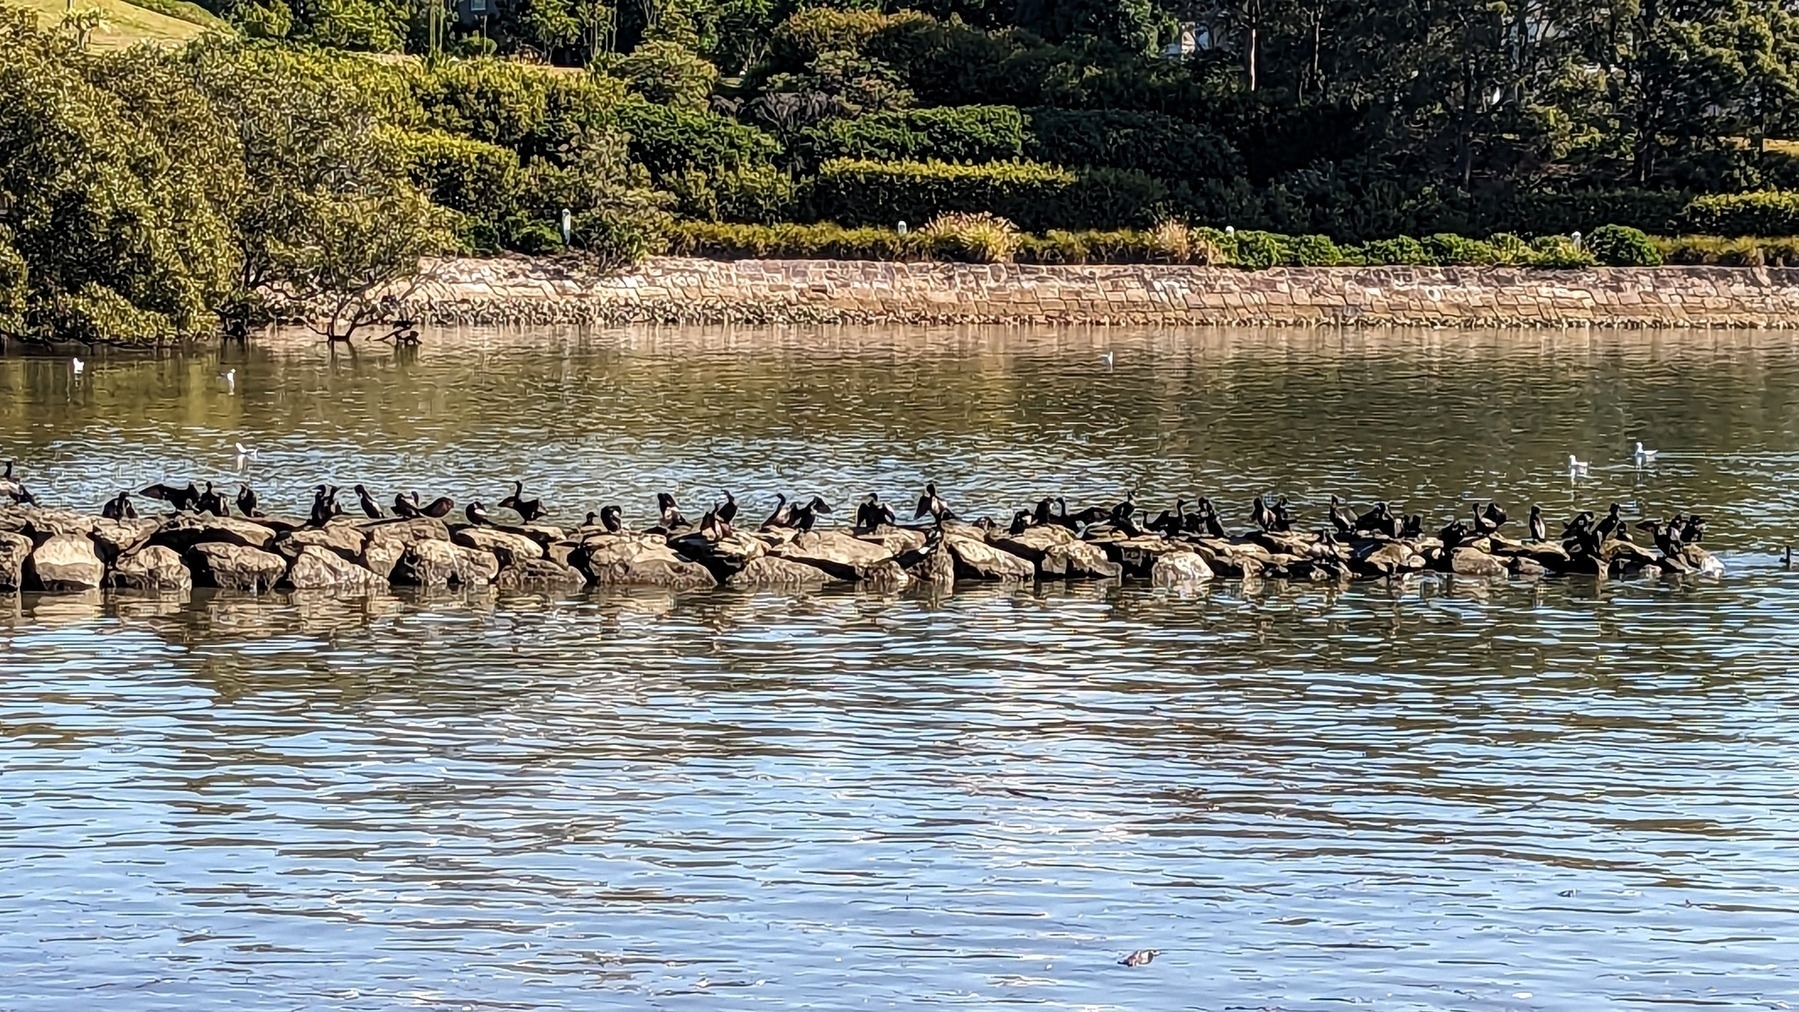 A stone pier juts out into a bay with a heavily vegataded waterfront in the background. On the pier many cormorants gather.